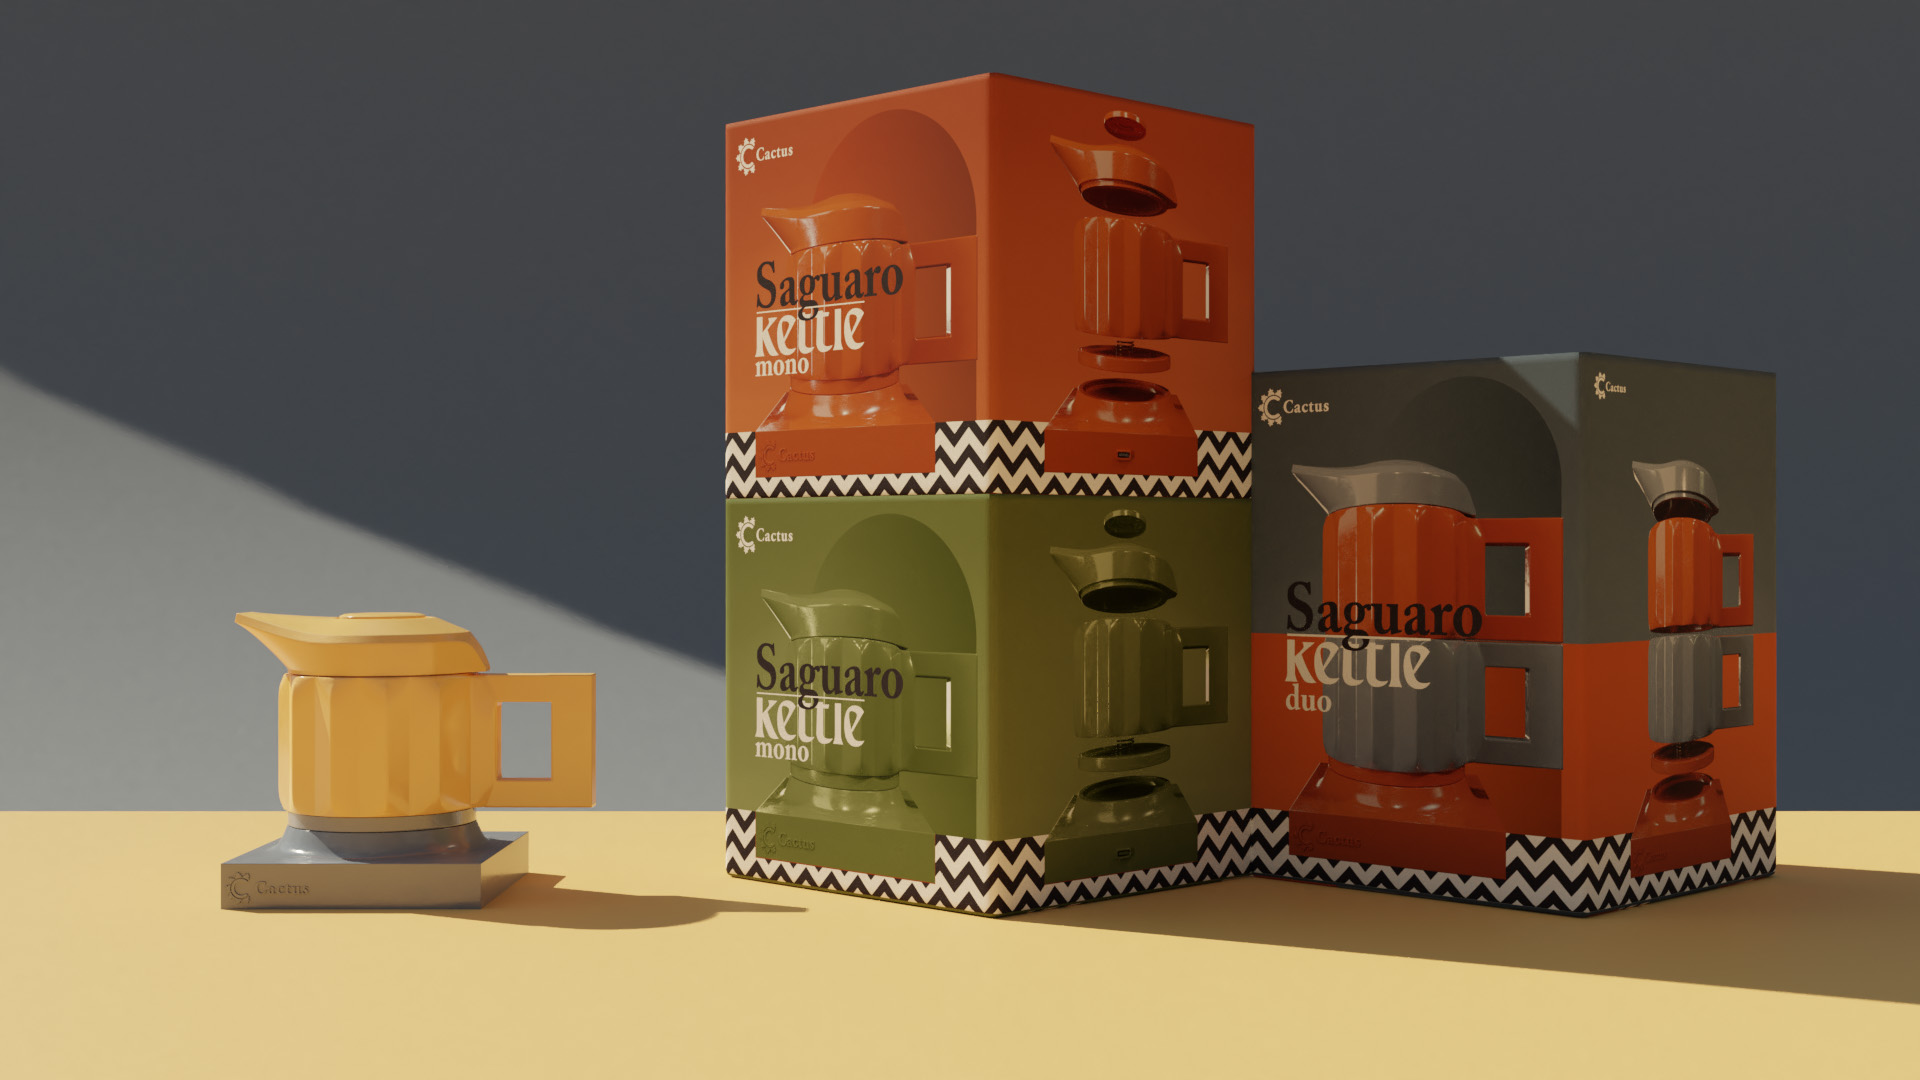 Cactus Brand and Packaging Design for Modular Sustainable Appliances